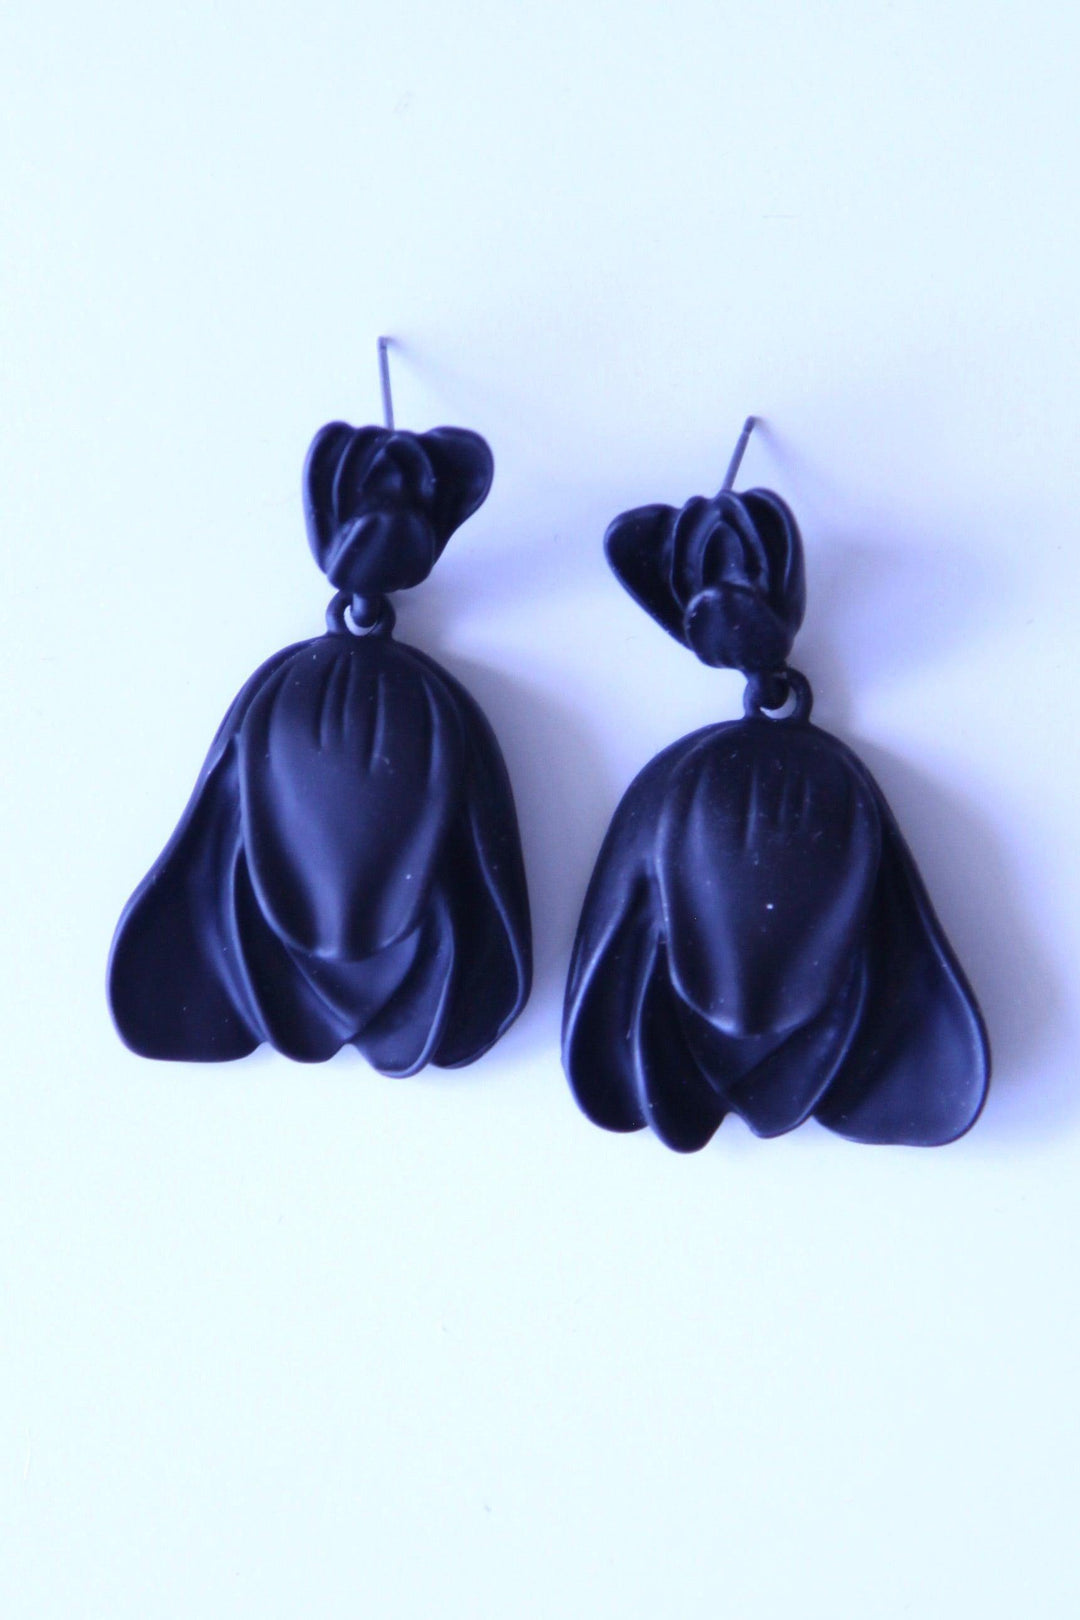 Black dangle earrings in the shape of flower from Tres Chic Texas store